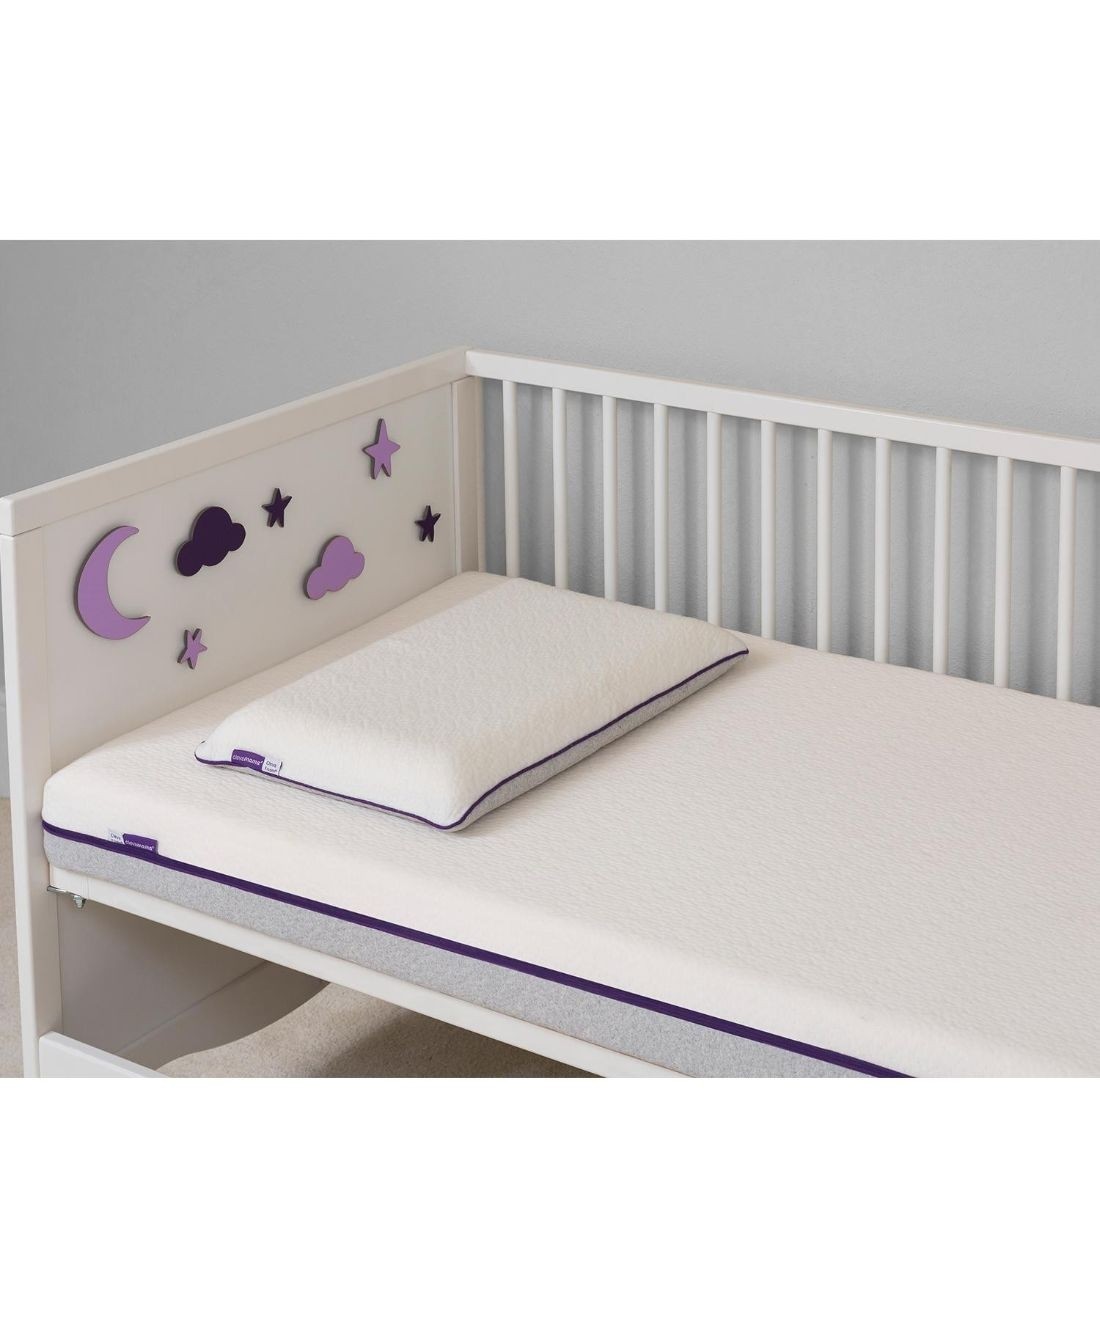 mothercare coolplus spring cot bed mattress reviews